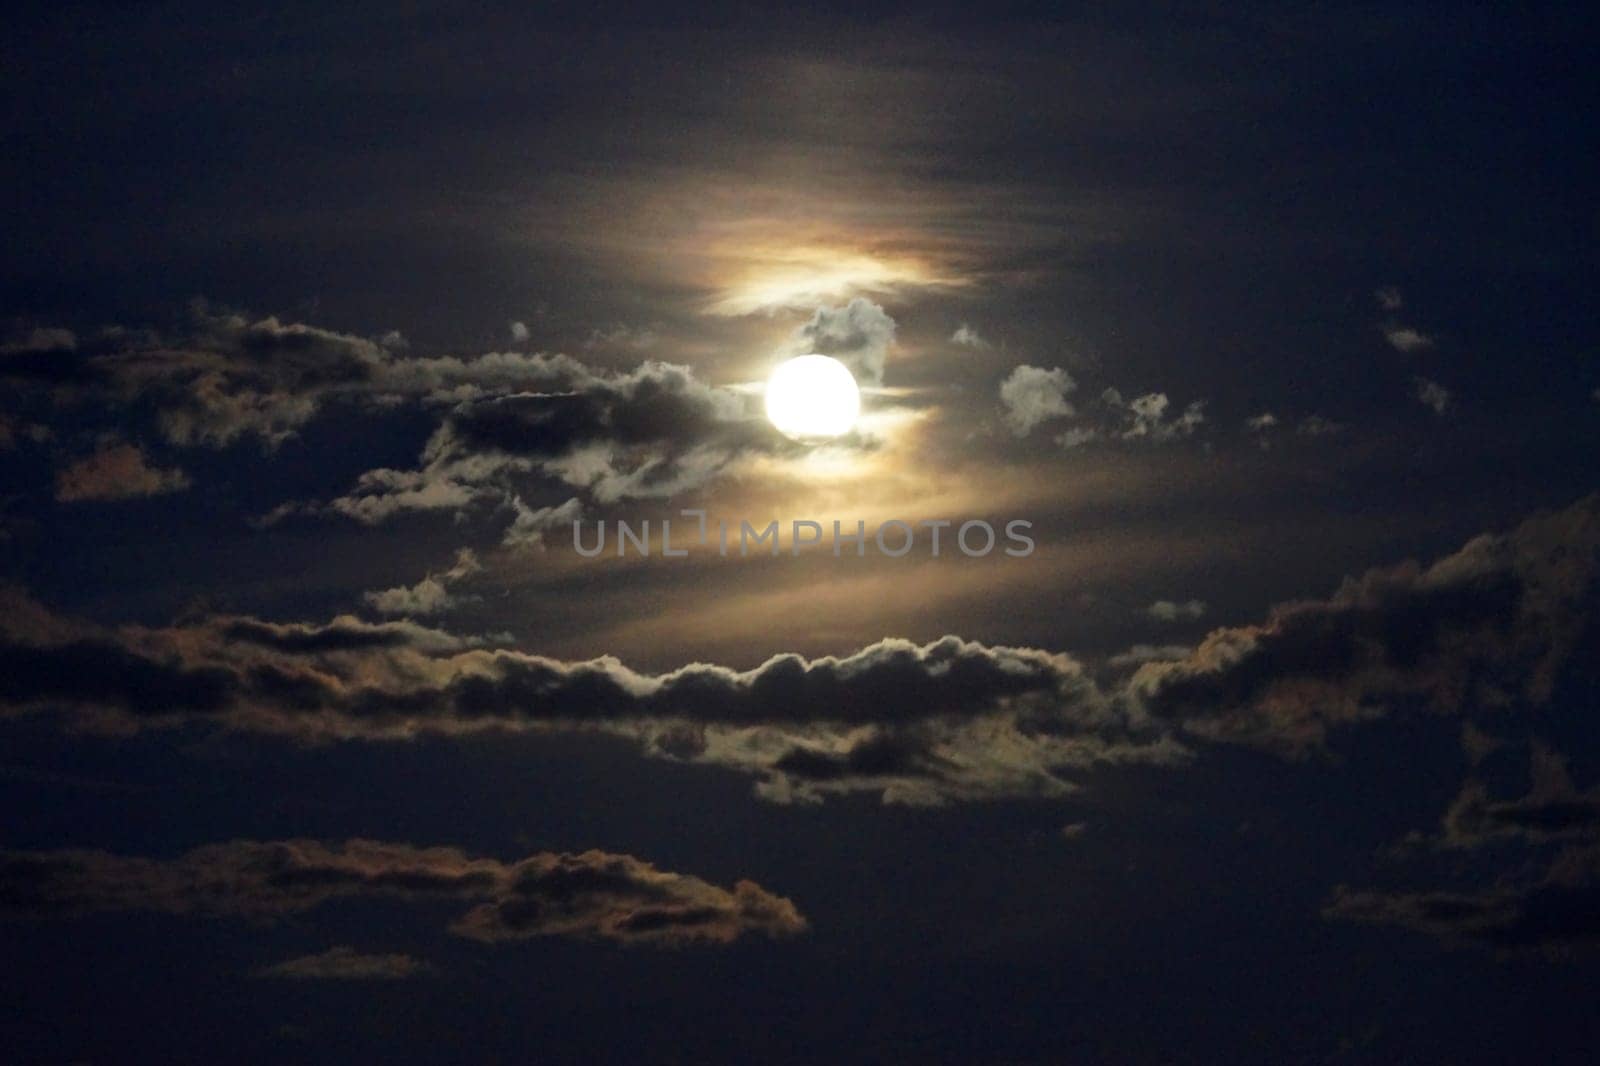 bright moon behind the clouds in the dark night sky by Annado